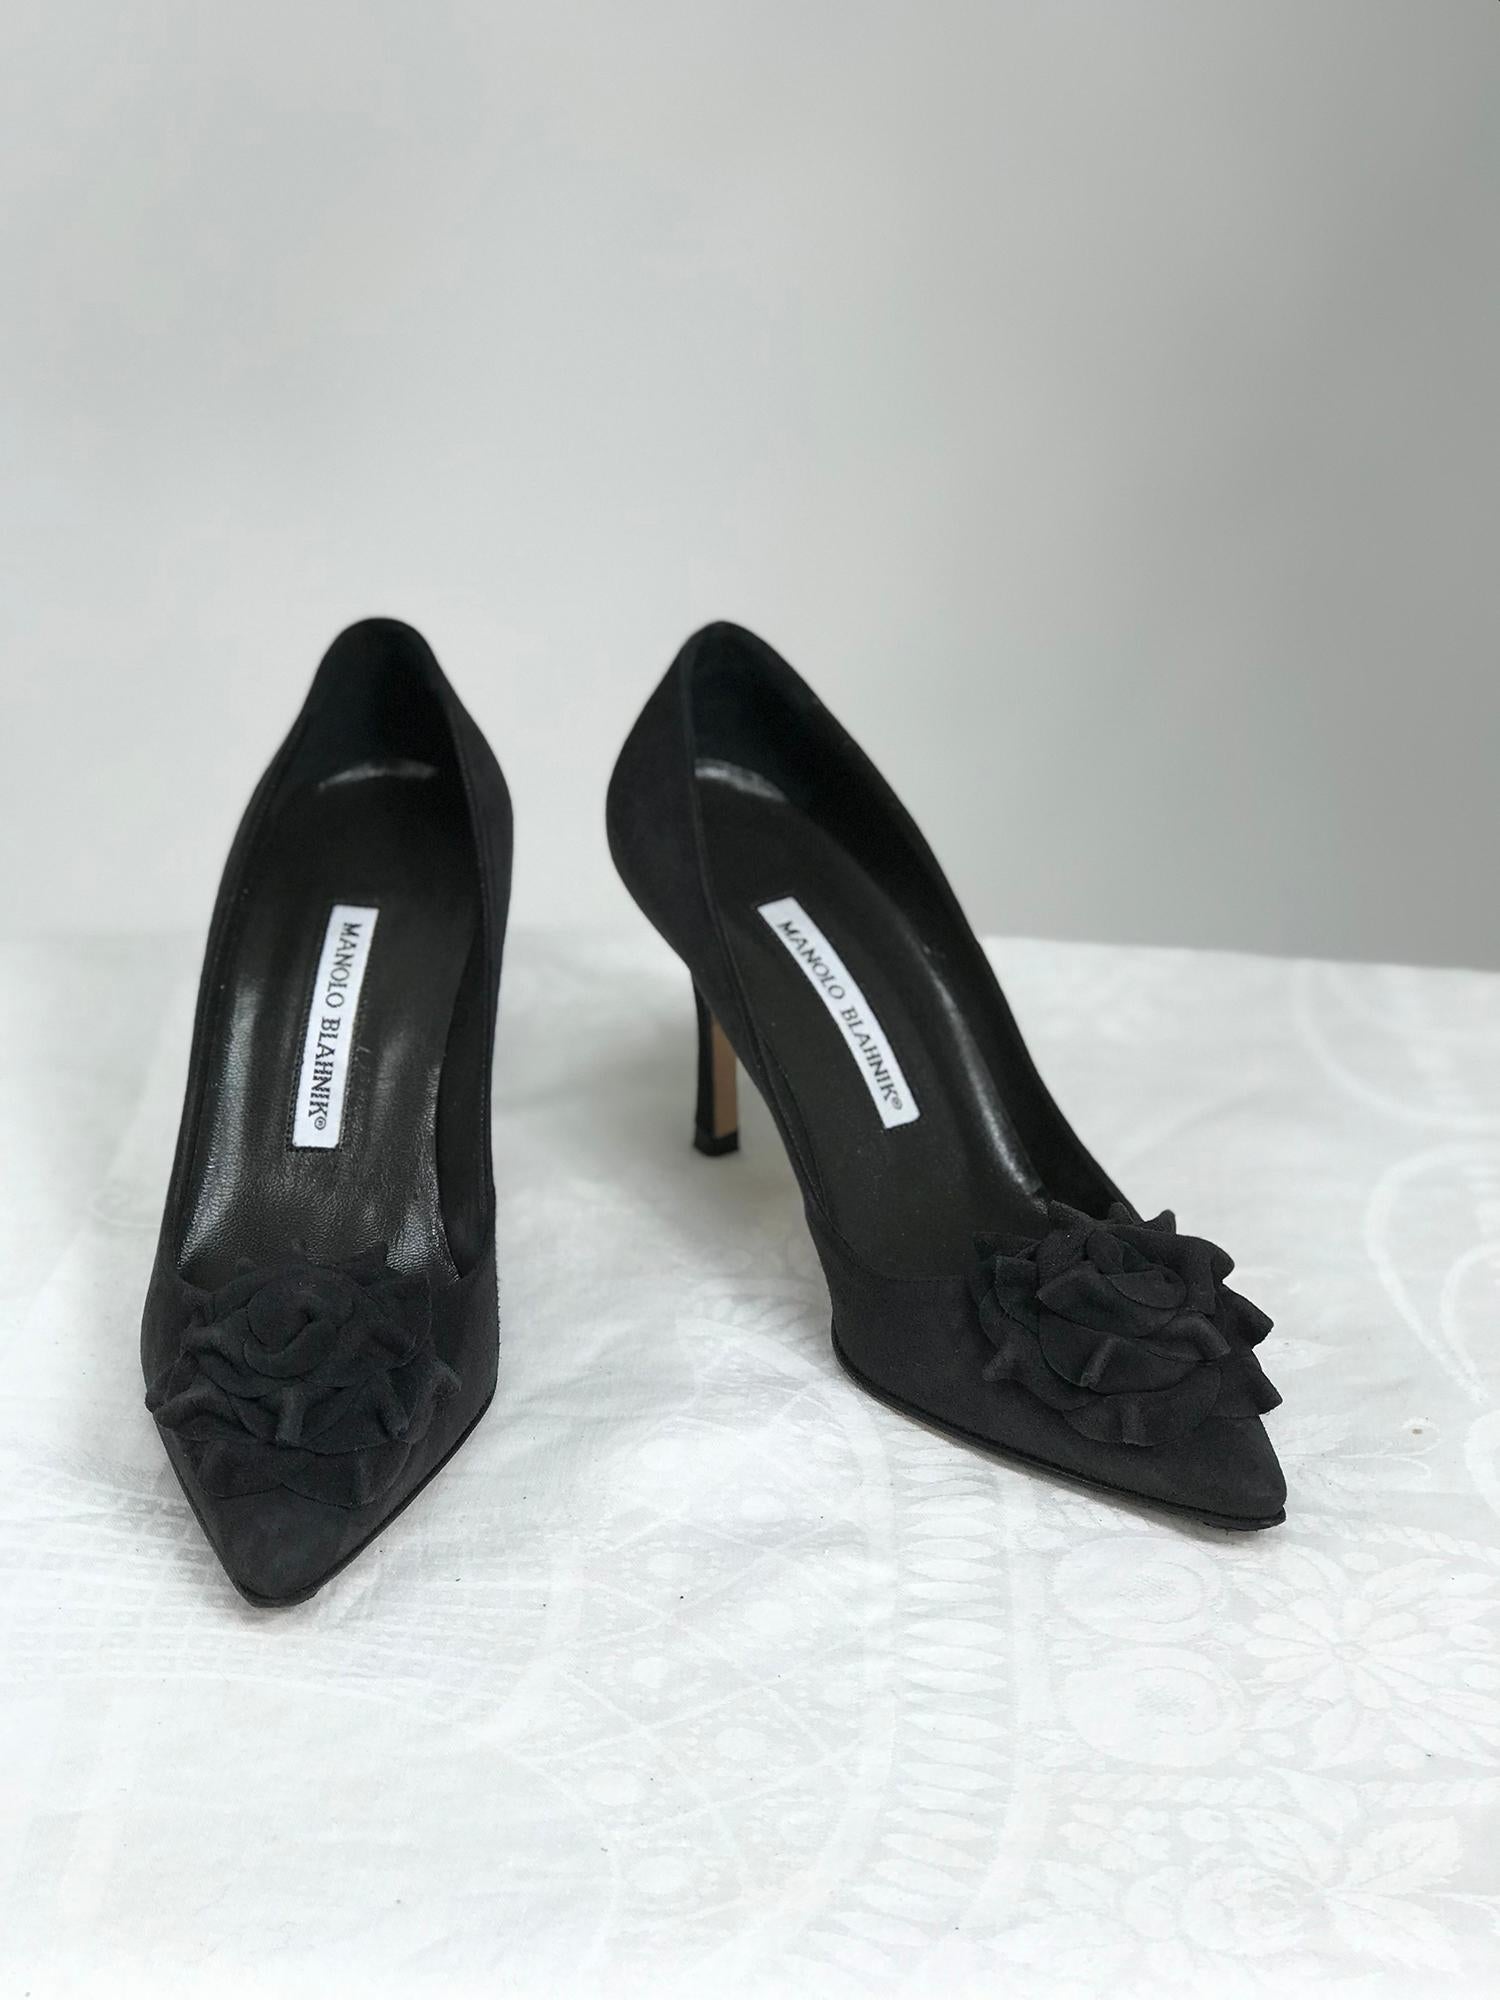 Manolo Blahnik Lisa with Flower black suede high heel pumps 36 1/2, with box and protector bag. 3 1/2 inch heels. In excellent pre worn condition. 